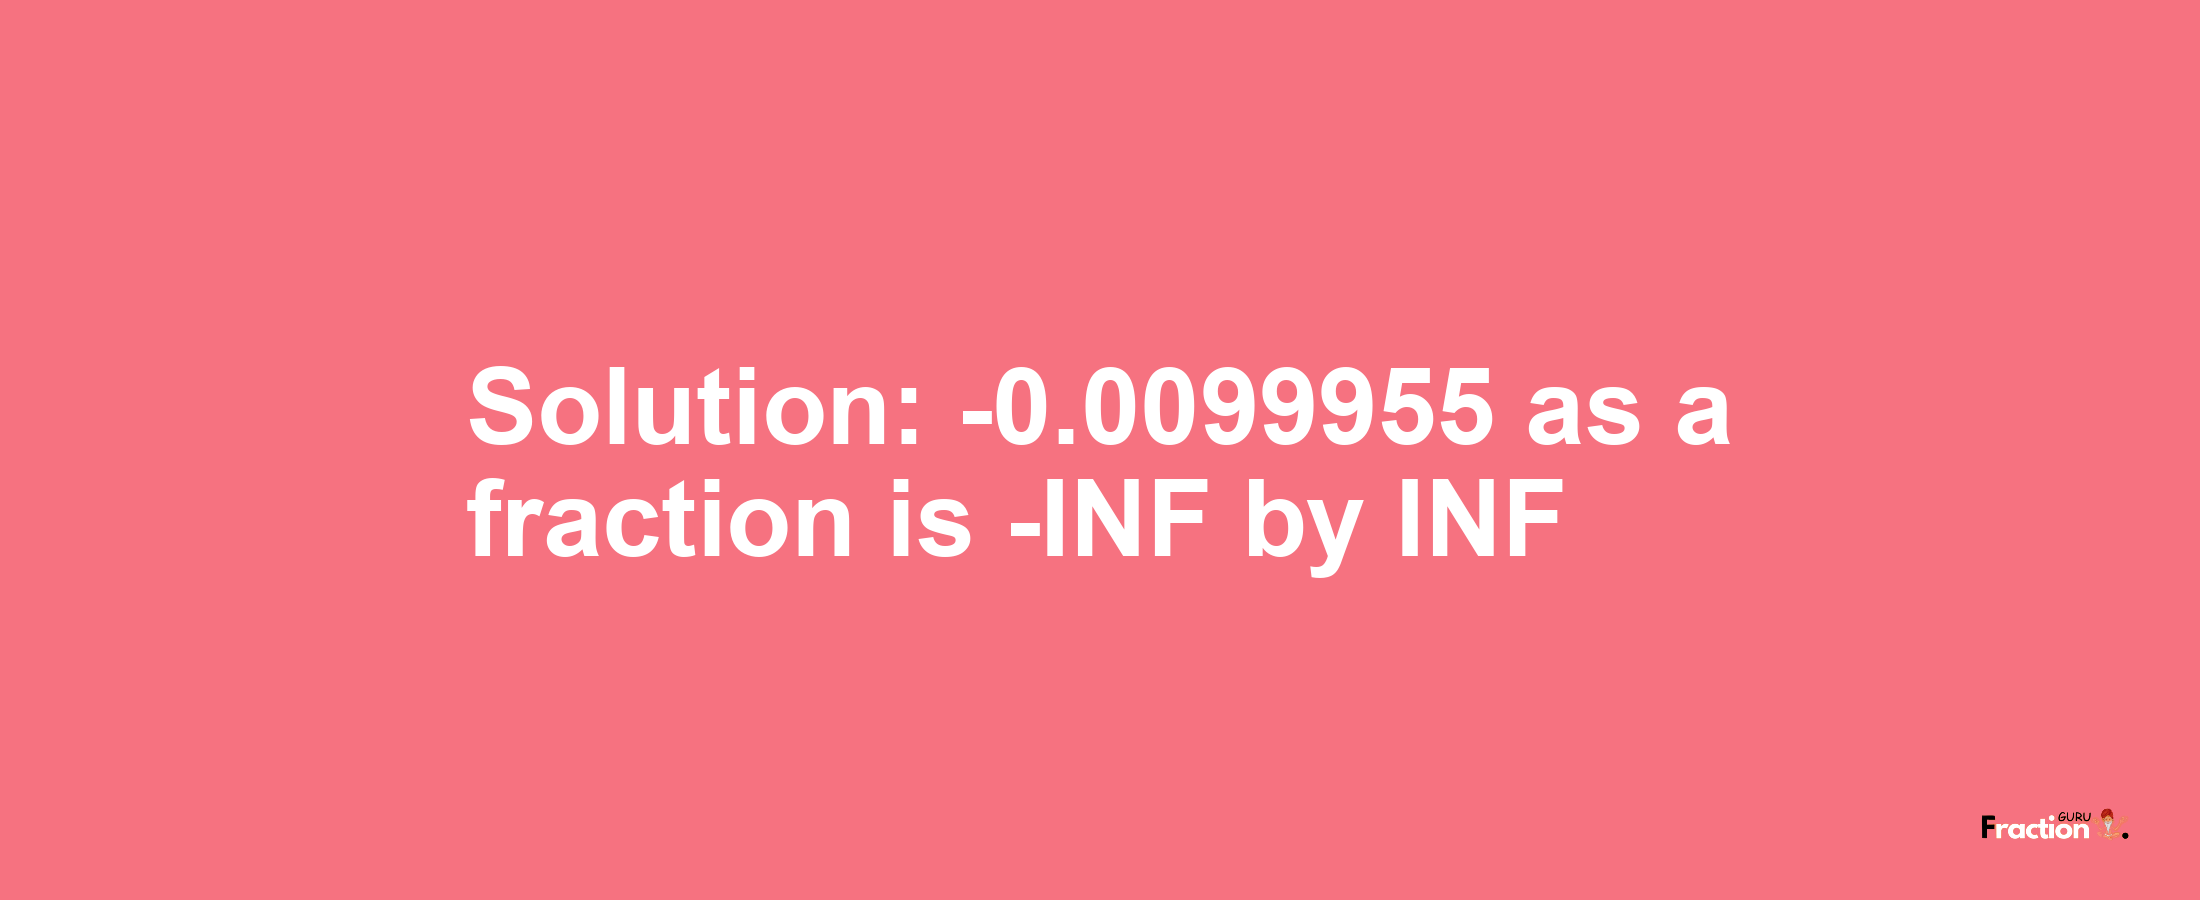 Solution:-0.0099955 as a fraction is -INF/INF